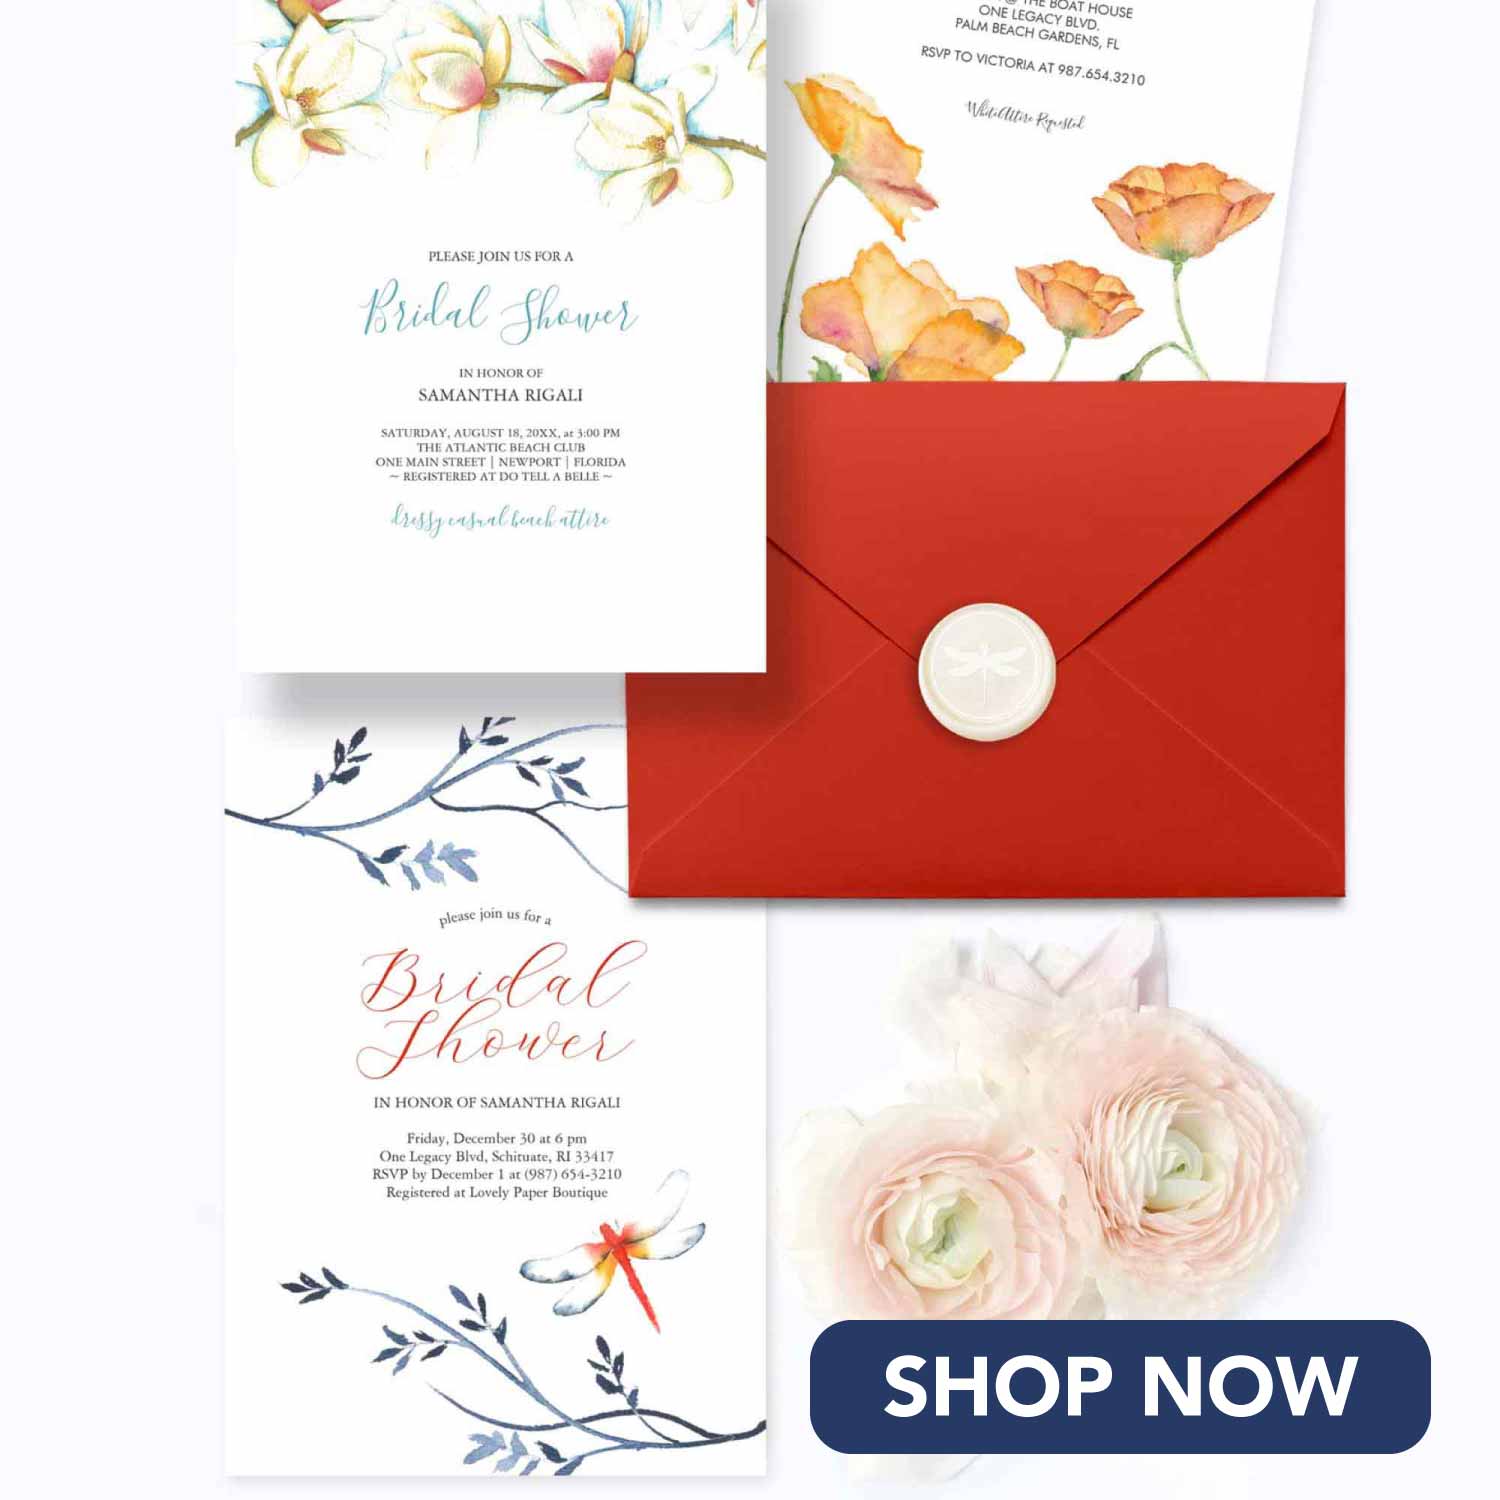 Bridal shower invitations designed by Victoria Grigaliunas of Do Tell A Belle